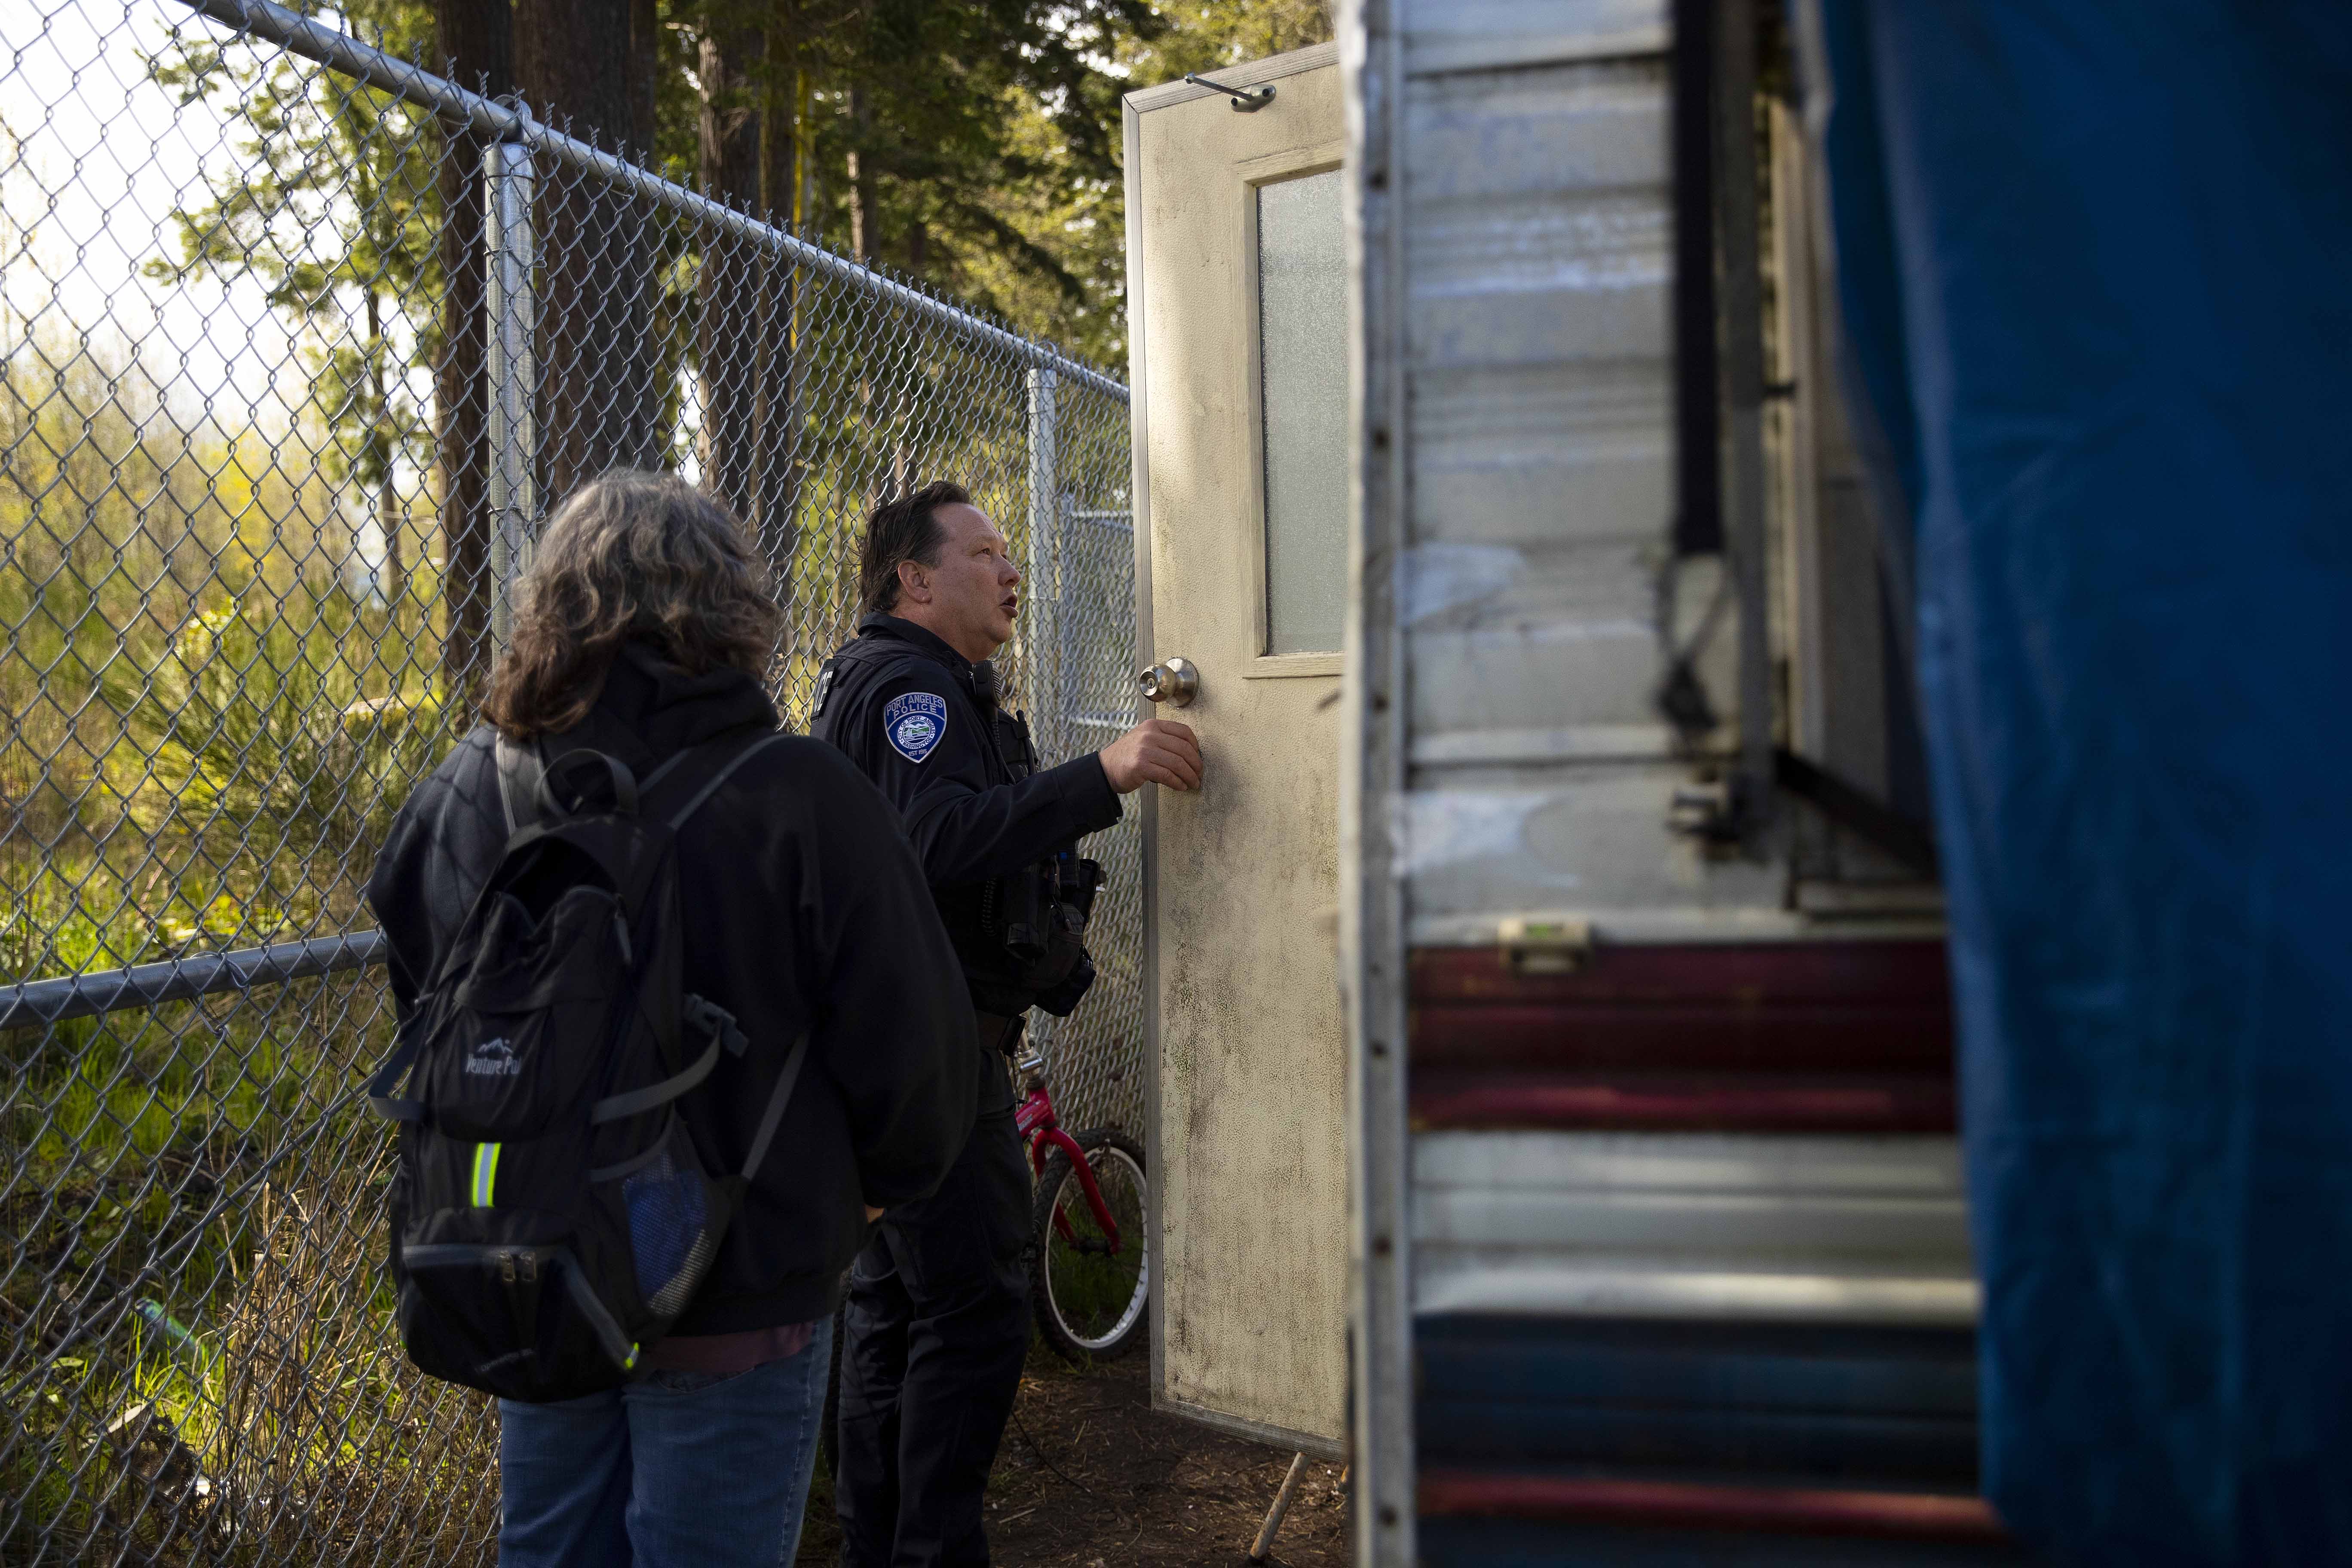 Pam Paine, outreach coordinator at Olympic Peninsula Community Clinic, left, and Port Angeles code enforcement officer Derek Miller, right, check on an individual living in an R.V. and offer shelter options and services on Tuesday, April 25, 2023, in Port Angeles. KUOW Photo/Megan Farmer.